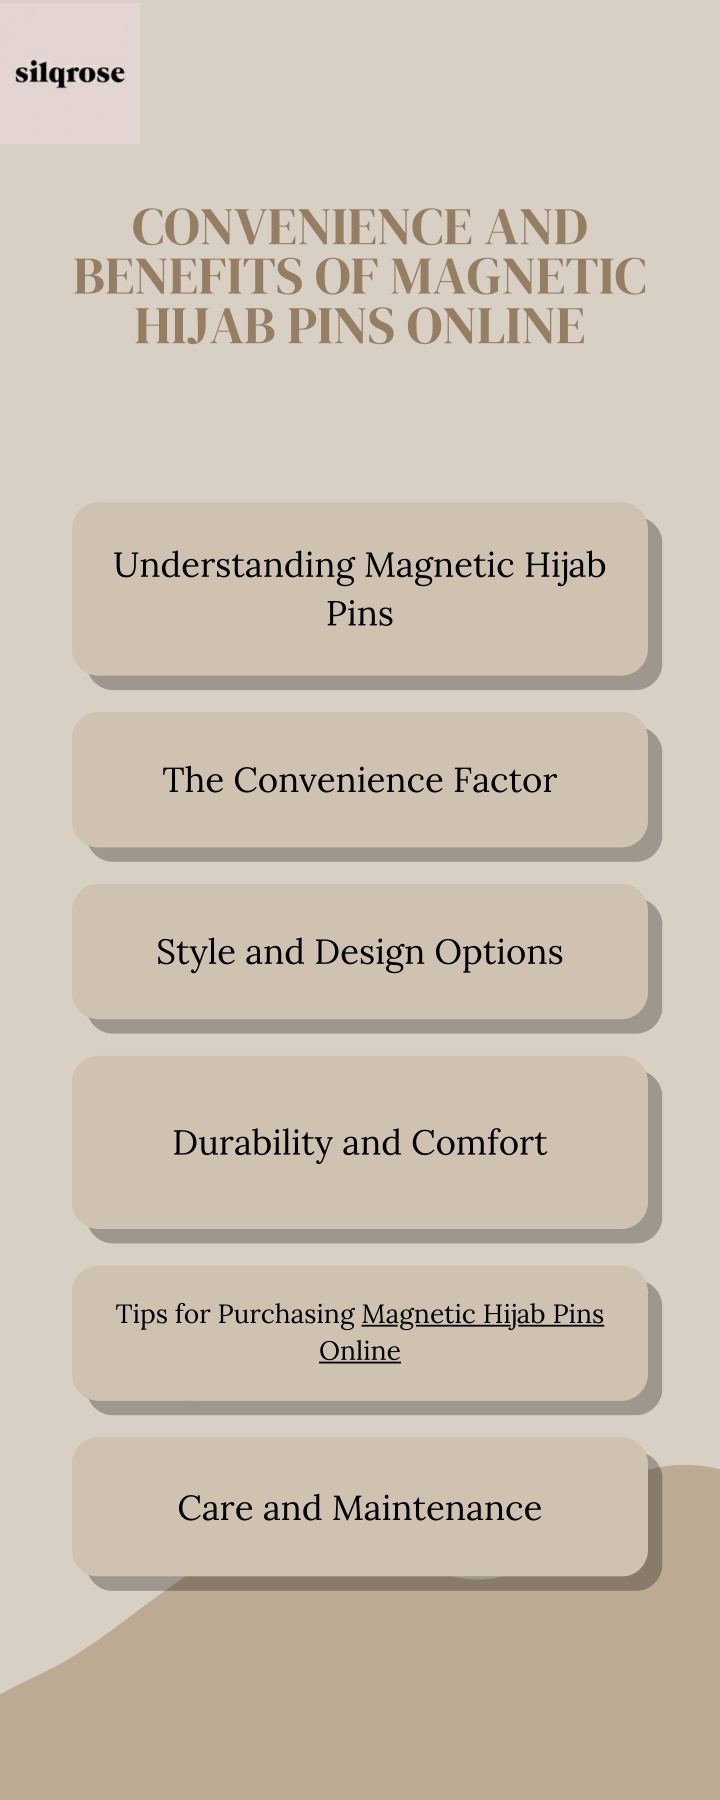 convenience and benefits of magnetic hijab pins